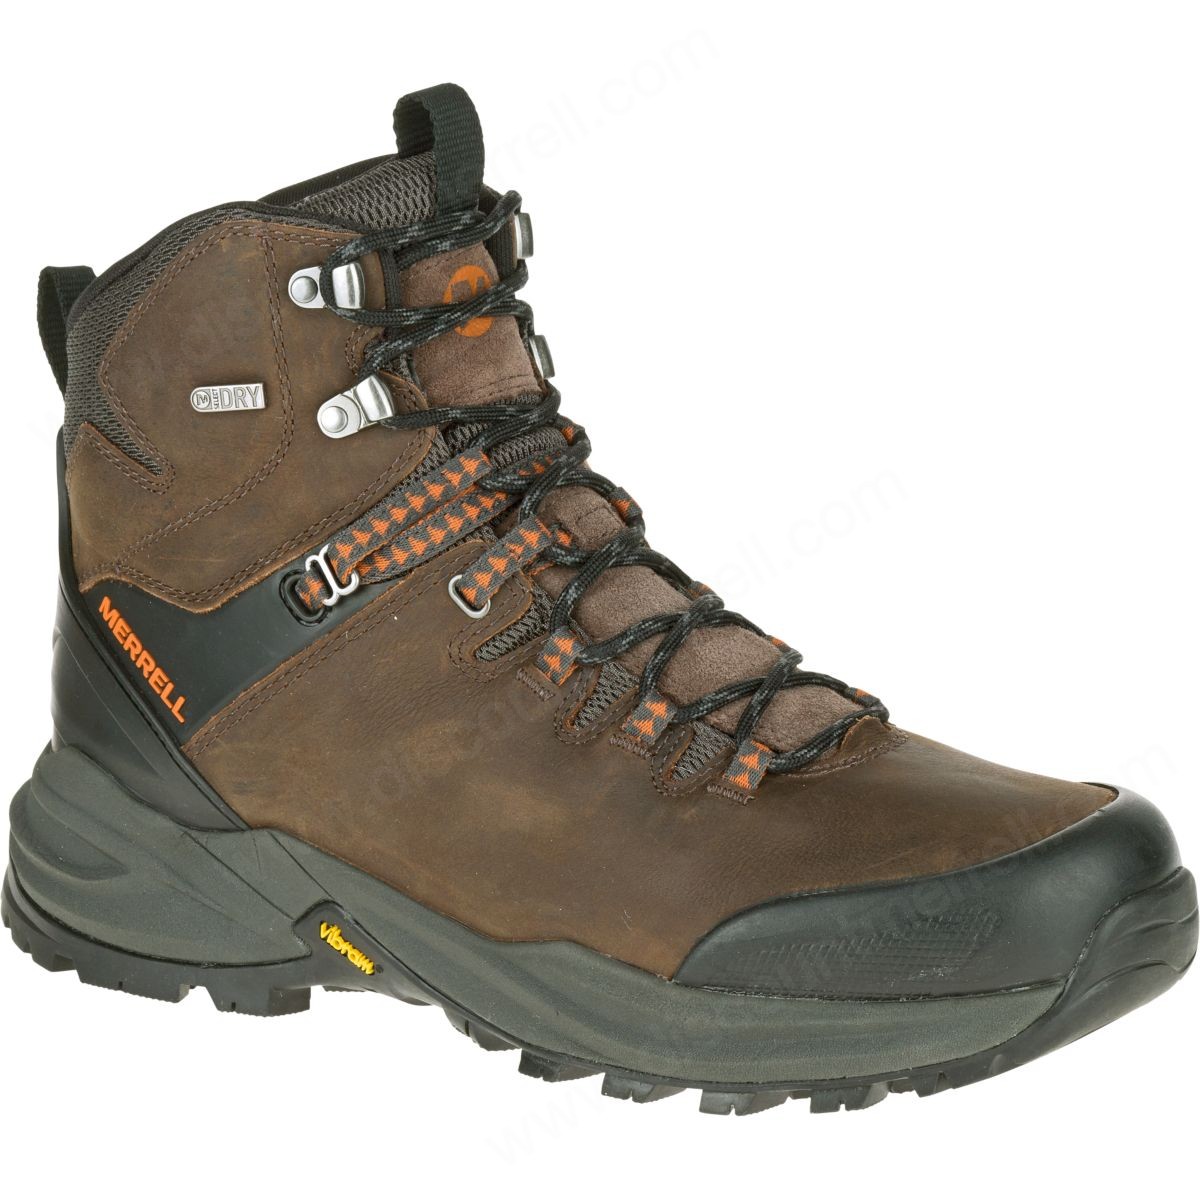 Merrell Man's Phaserbound Waterproof Clay - -0